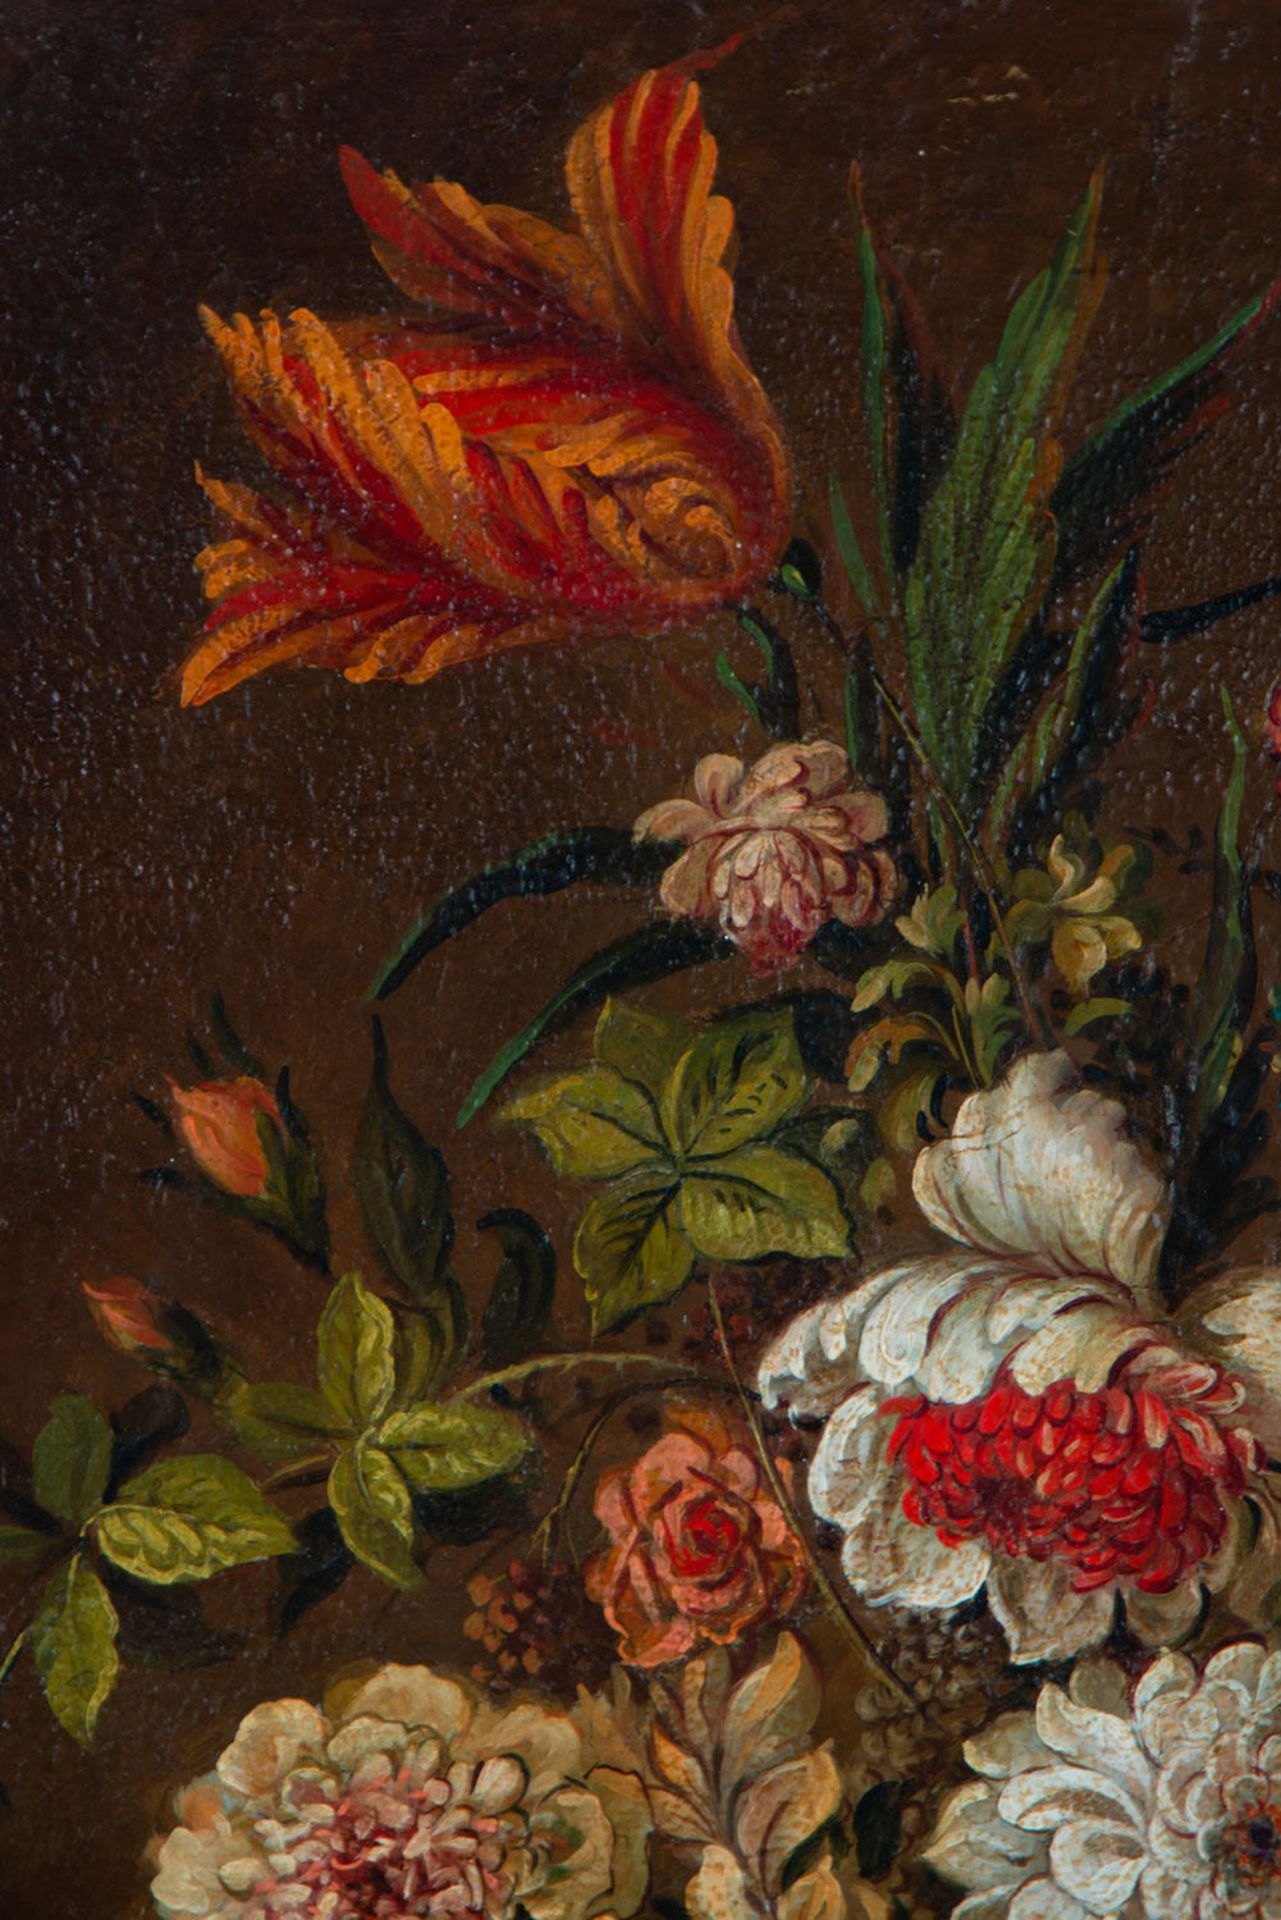 Pair of large still lifes of Flowers, Dutch school of the 17th - 18th century - Image 15 of 20